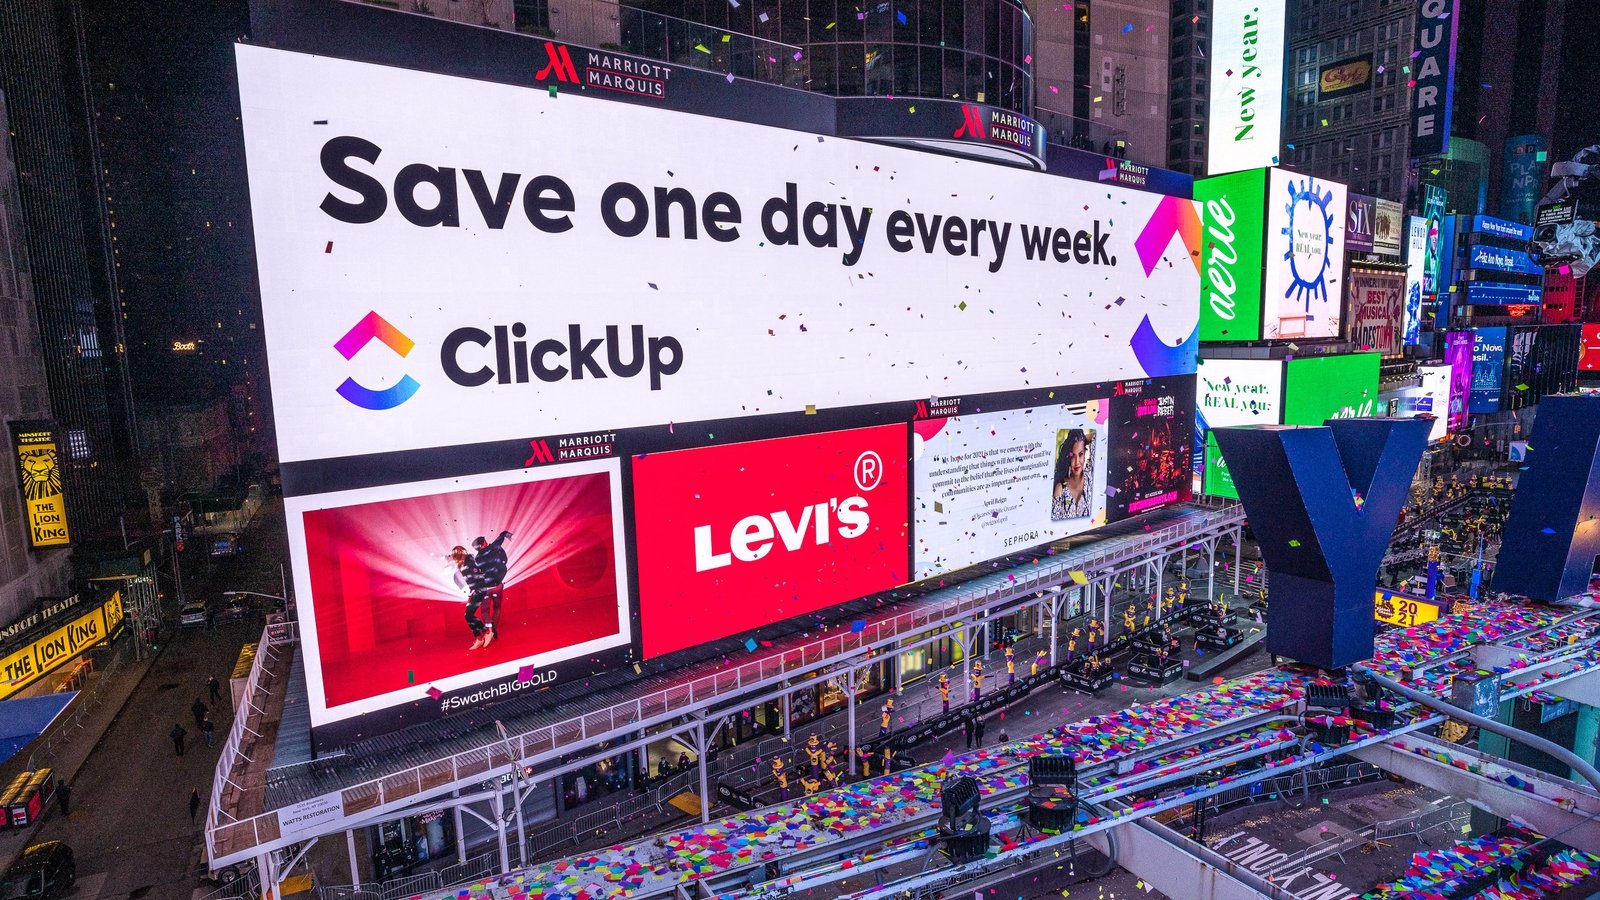 Save one day every week with ClickUp